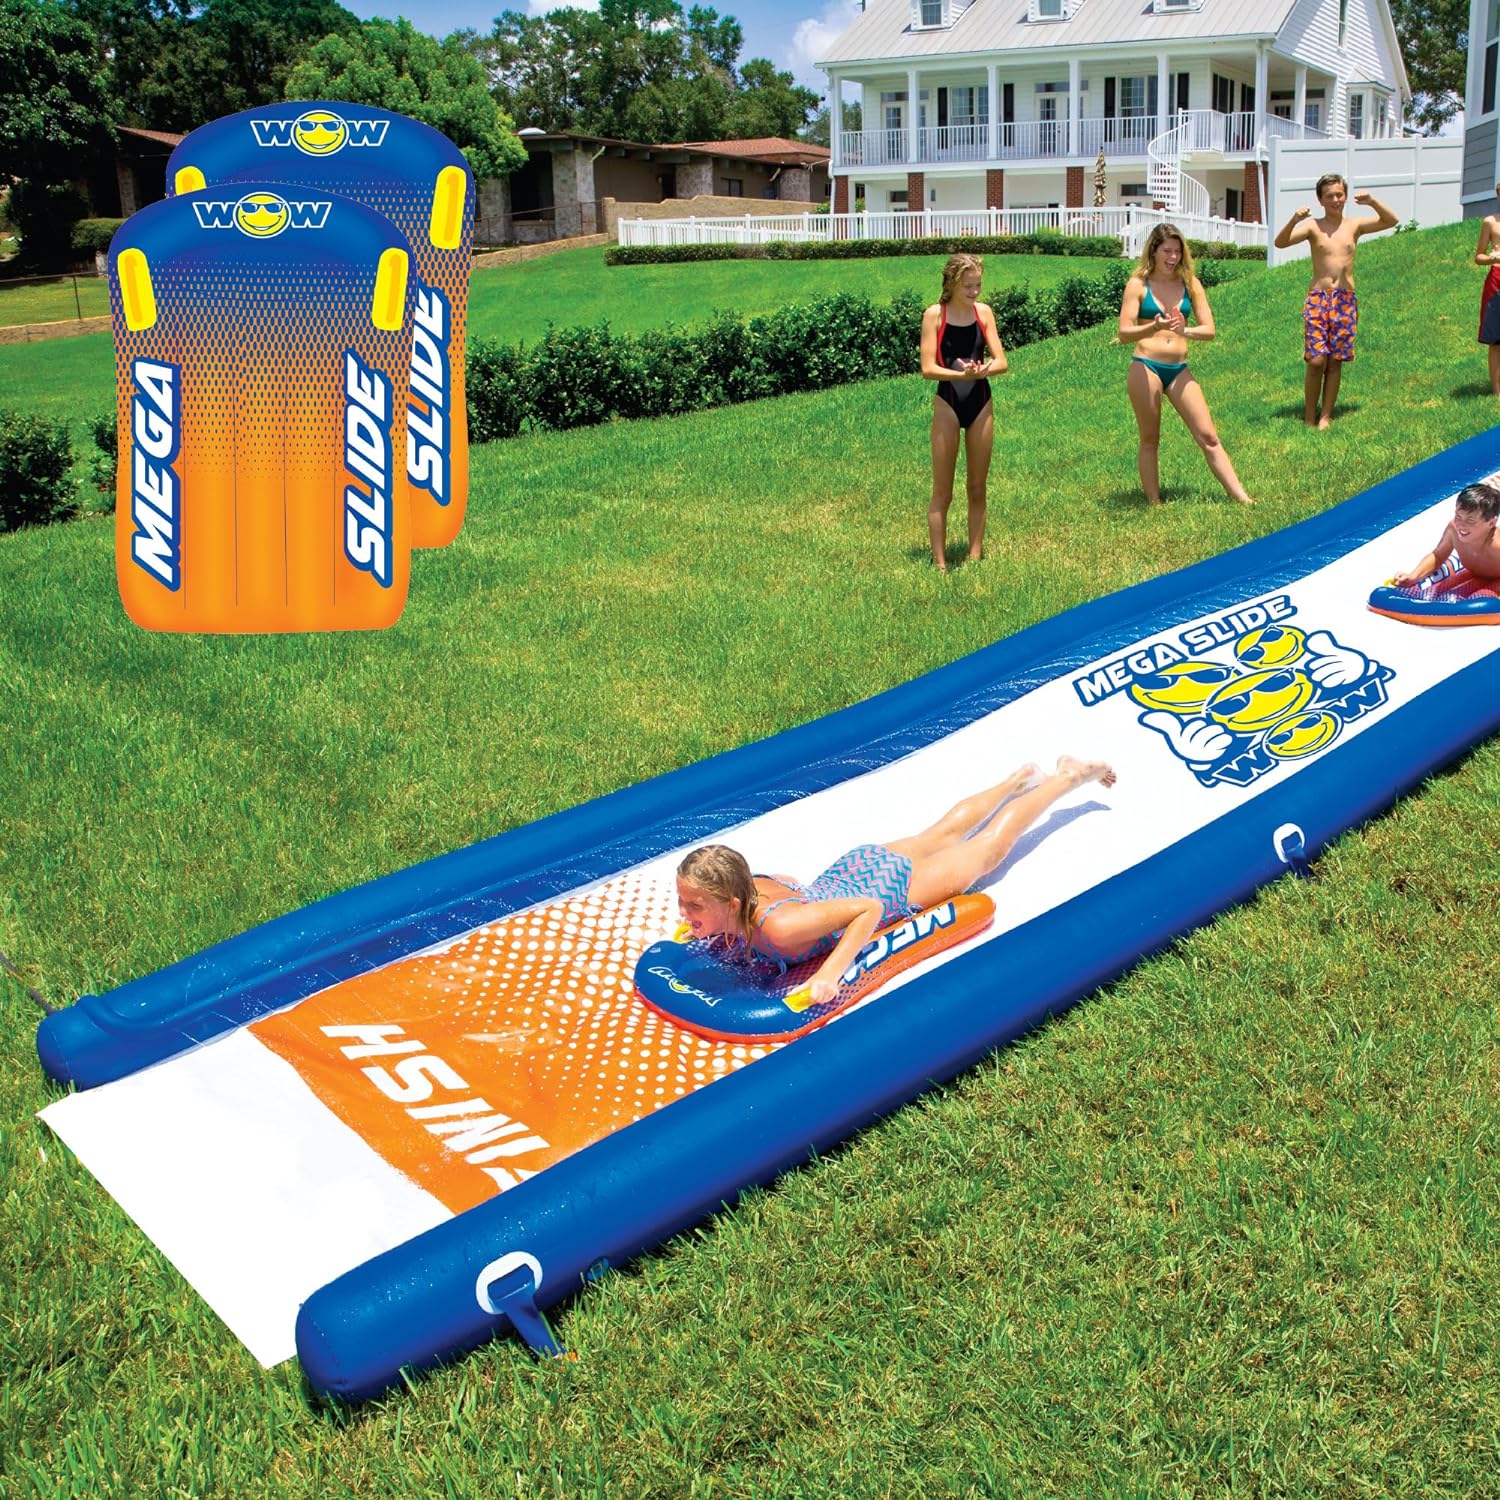 Wow Sports Mega Water Slide - Giant Backyard Slide with Sprinkler, Slip and Slide for Adults and Kids, Extra Long 25 ft x 6 ft